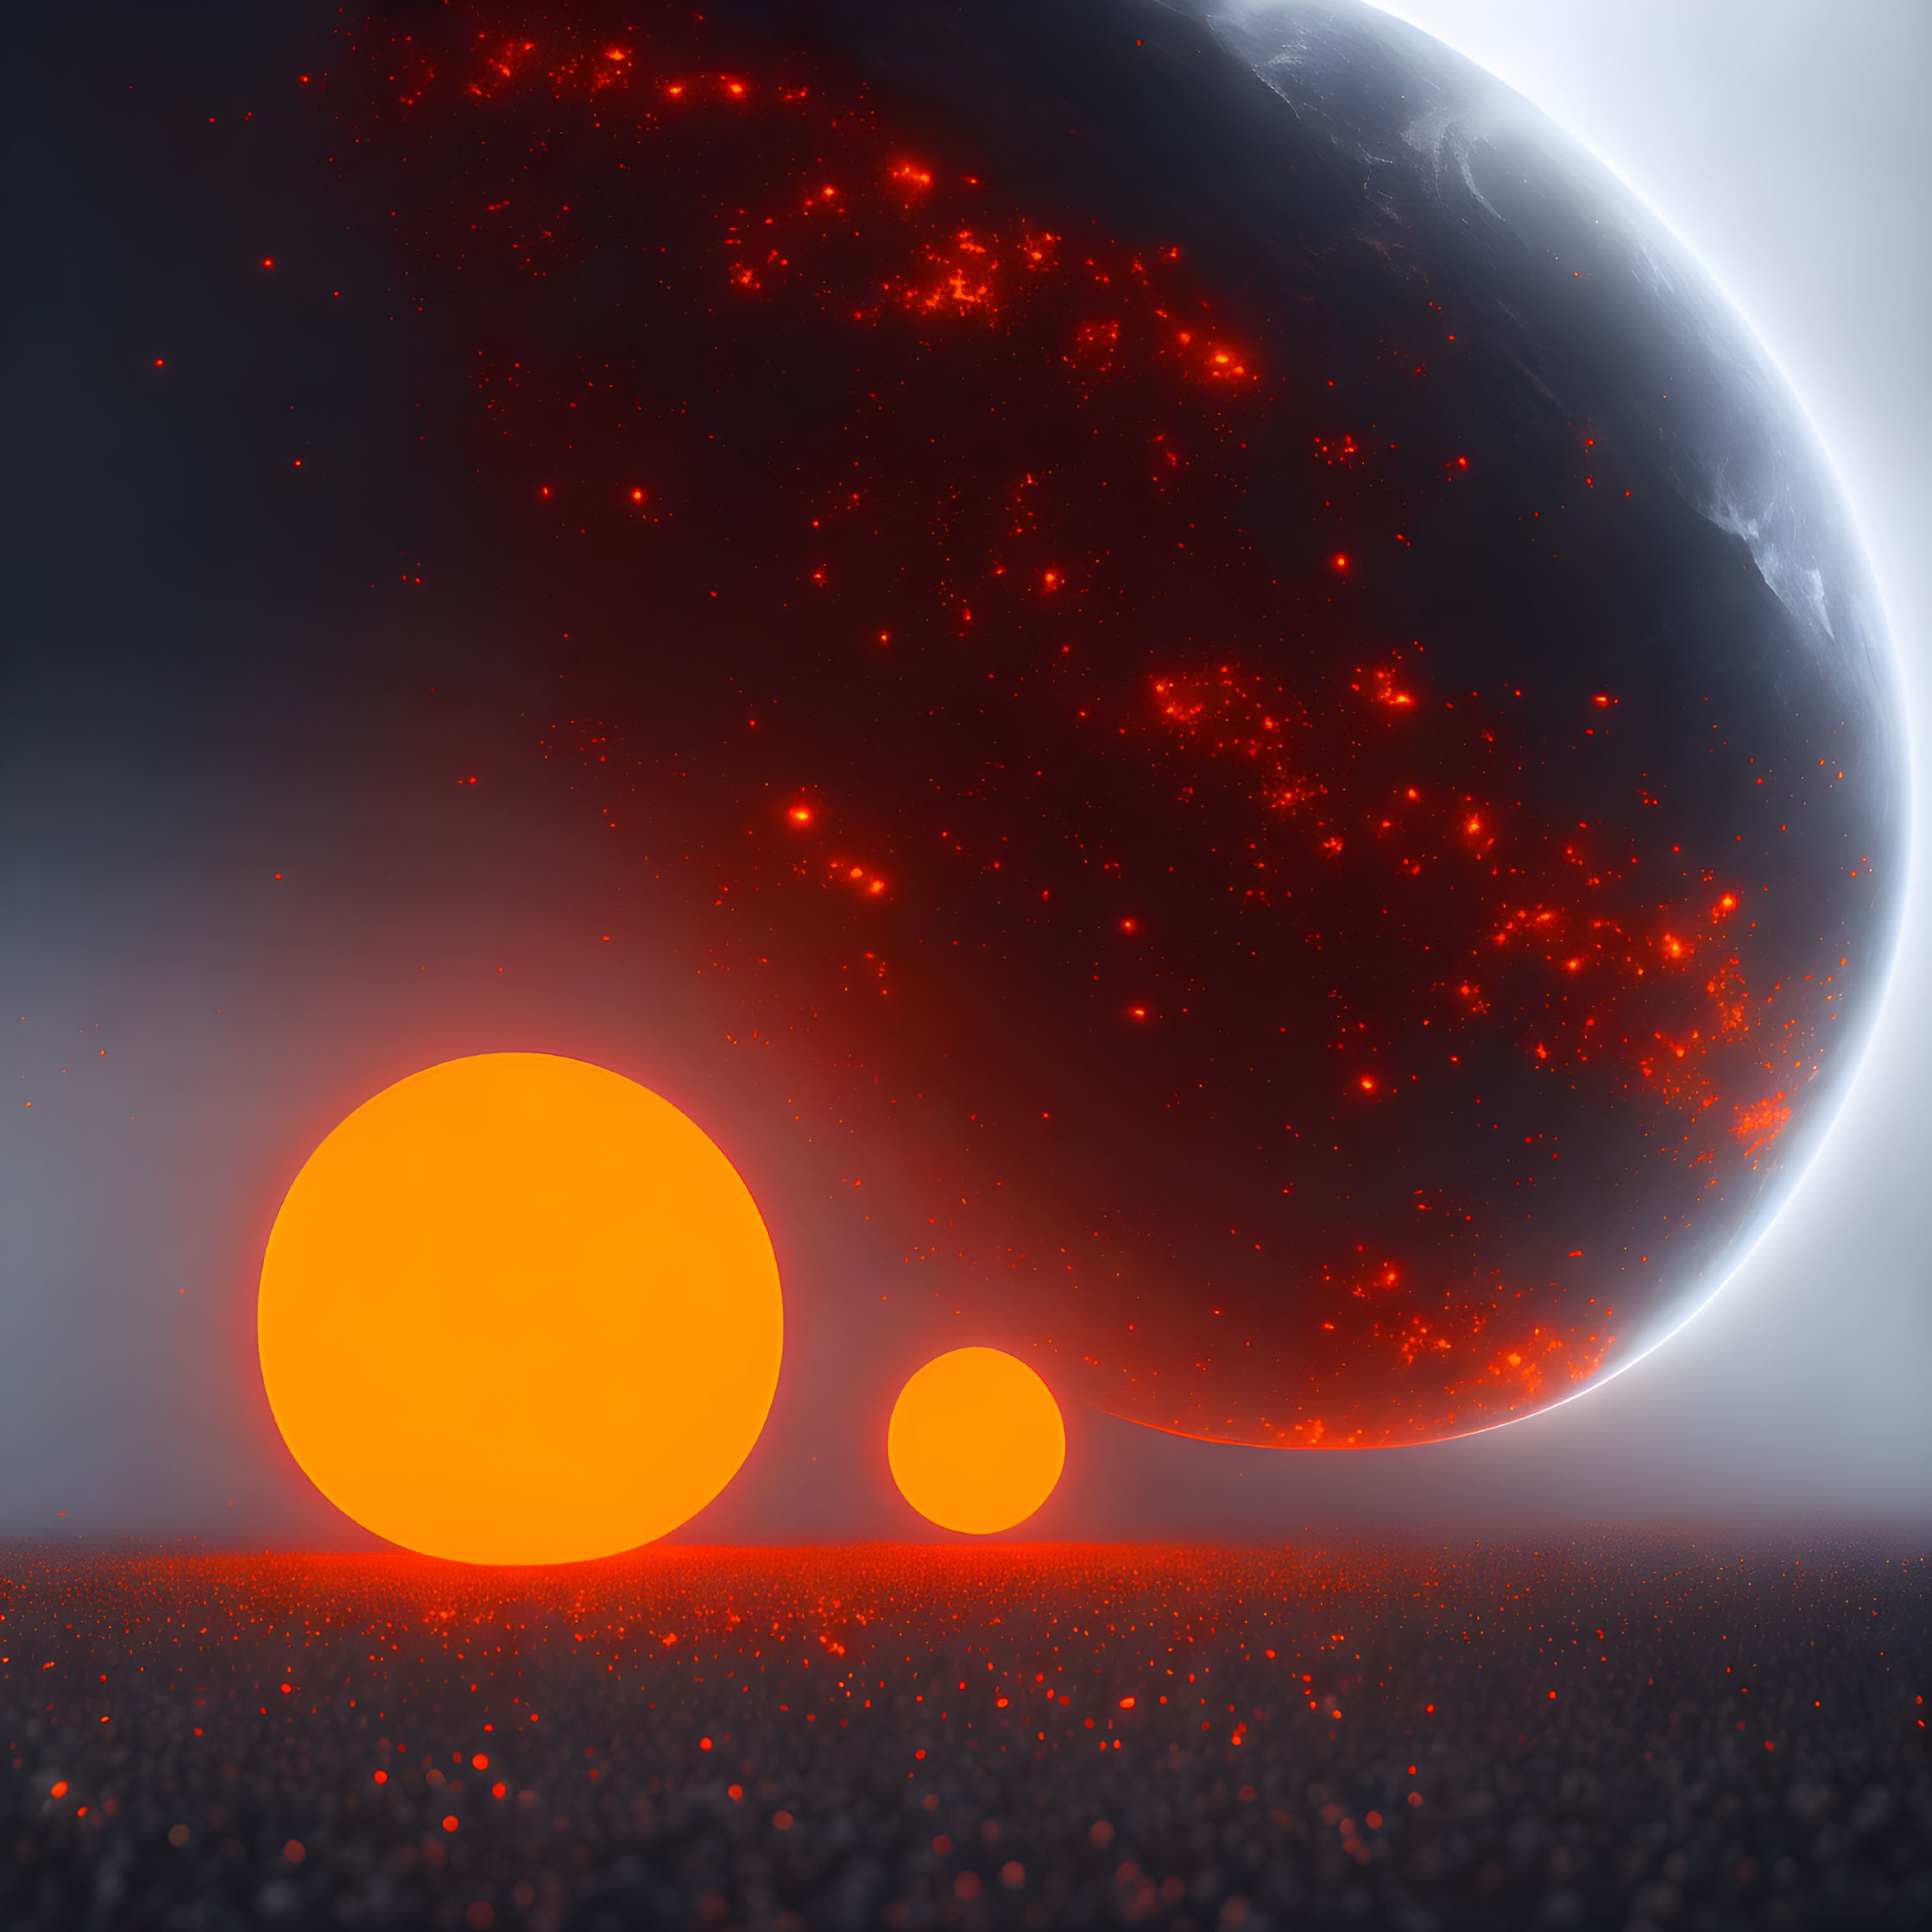 Surreal landscape with glowing orbs, red planet, and hazy sky